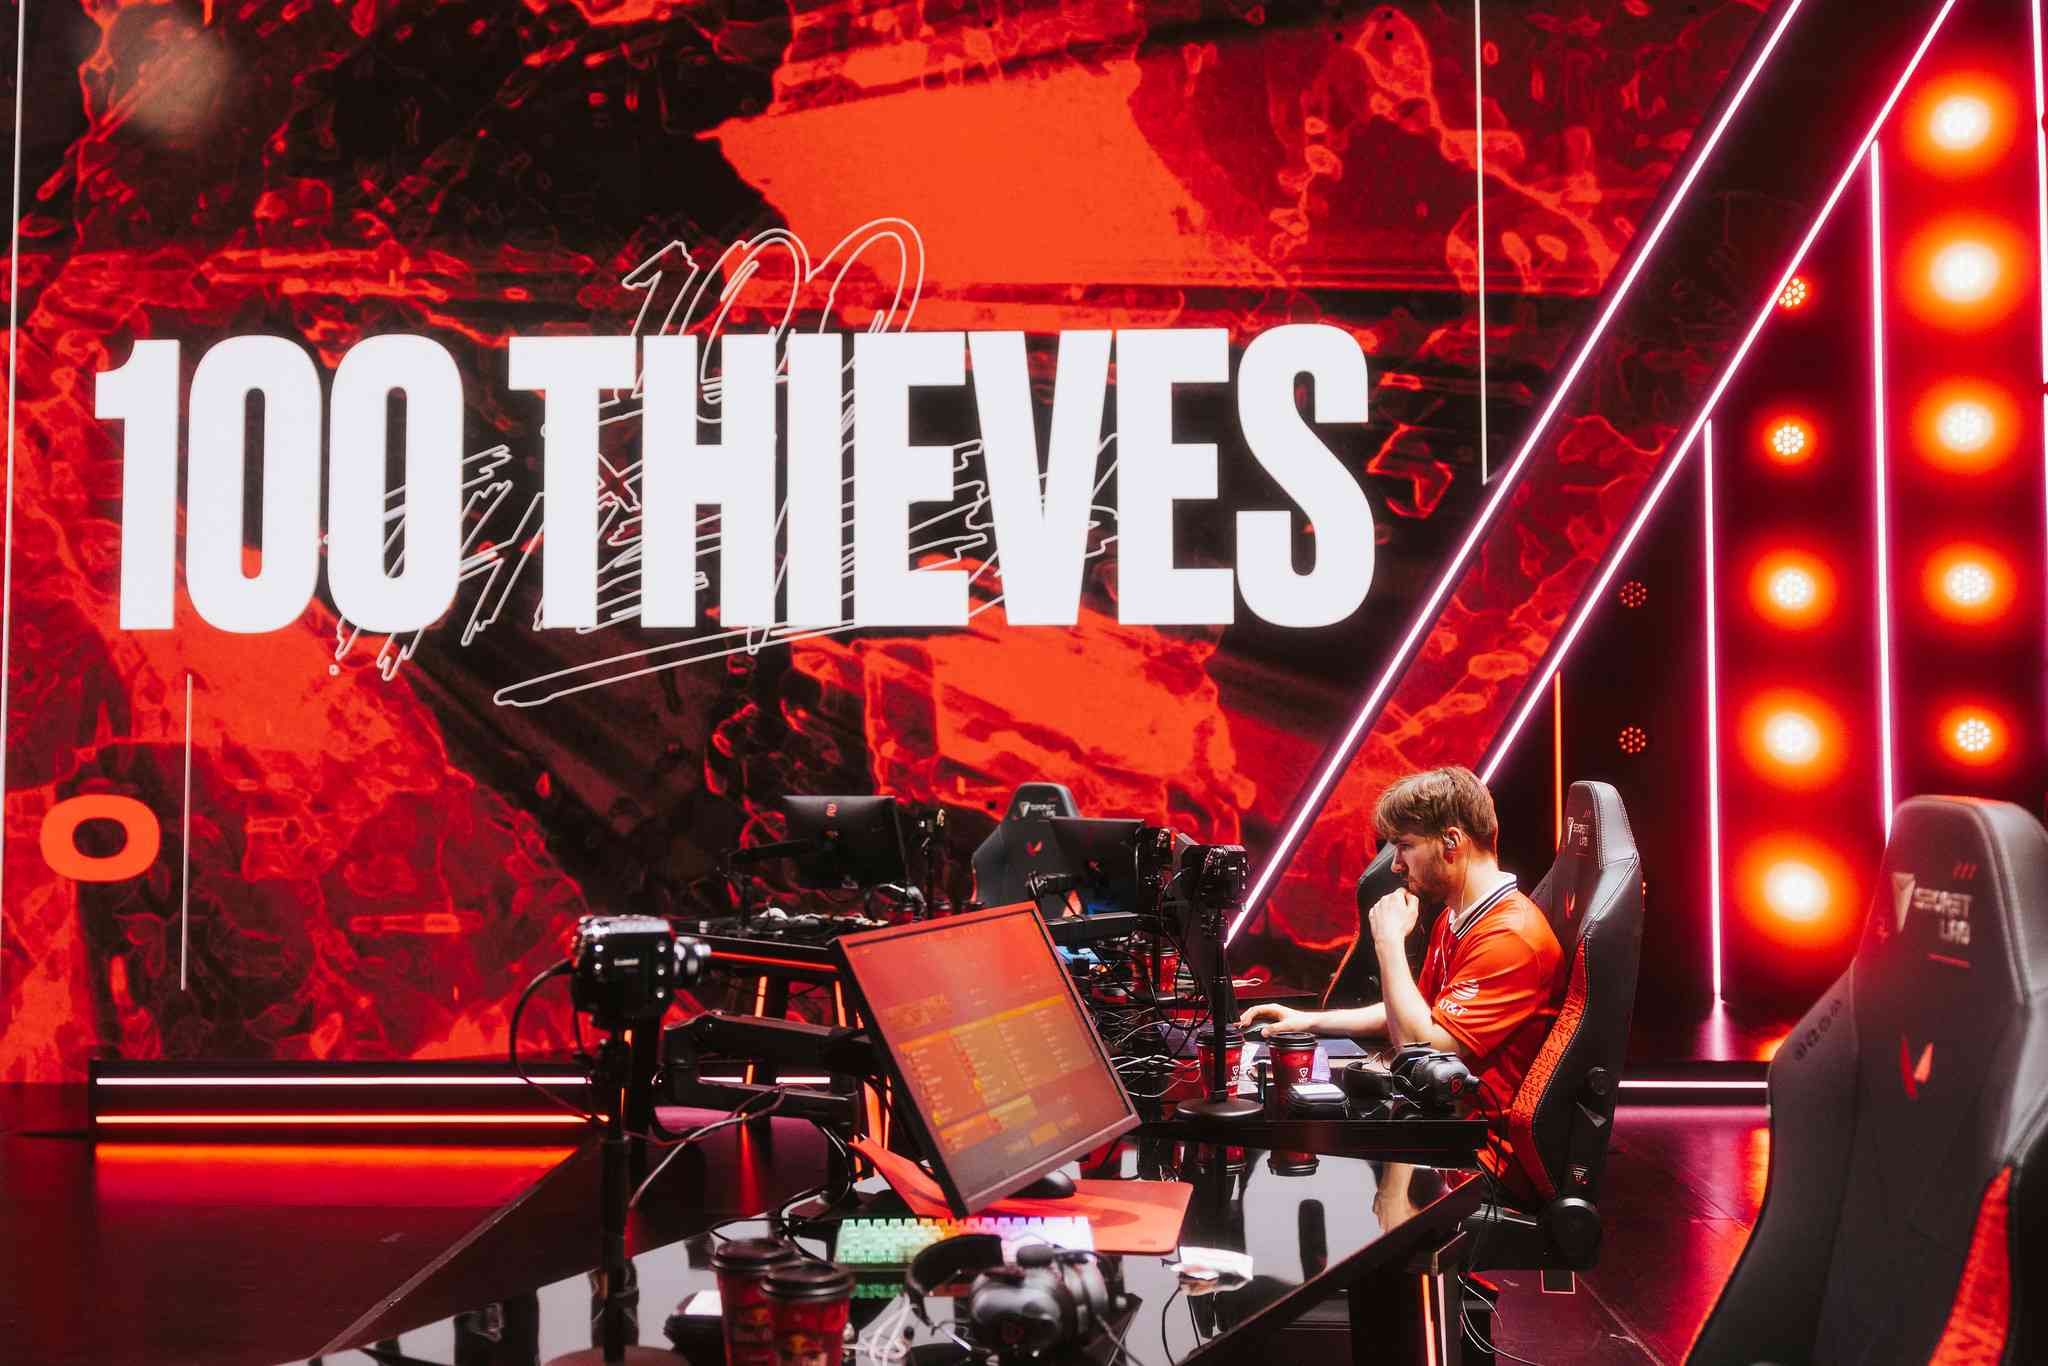 Brenden "stellar" McGrath of 100Thieves competing during Week 5 of 2023 VCT Americas at the Riot Games Arena on April 29, 2023. (Credit: Tina Jo/Riot Games)